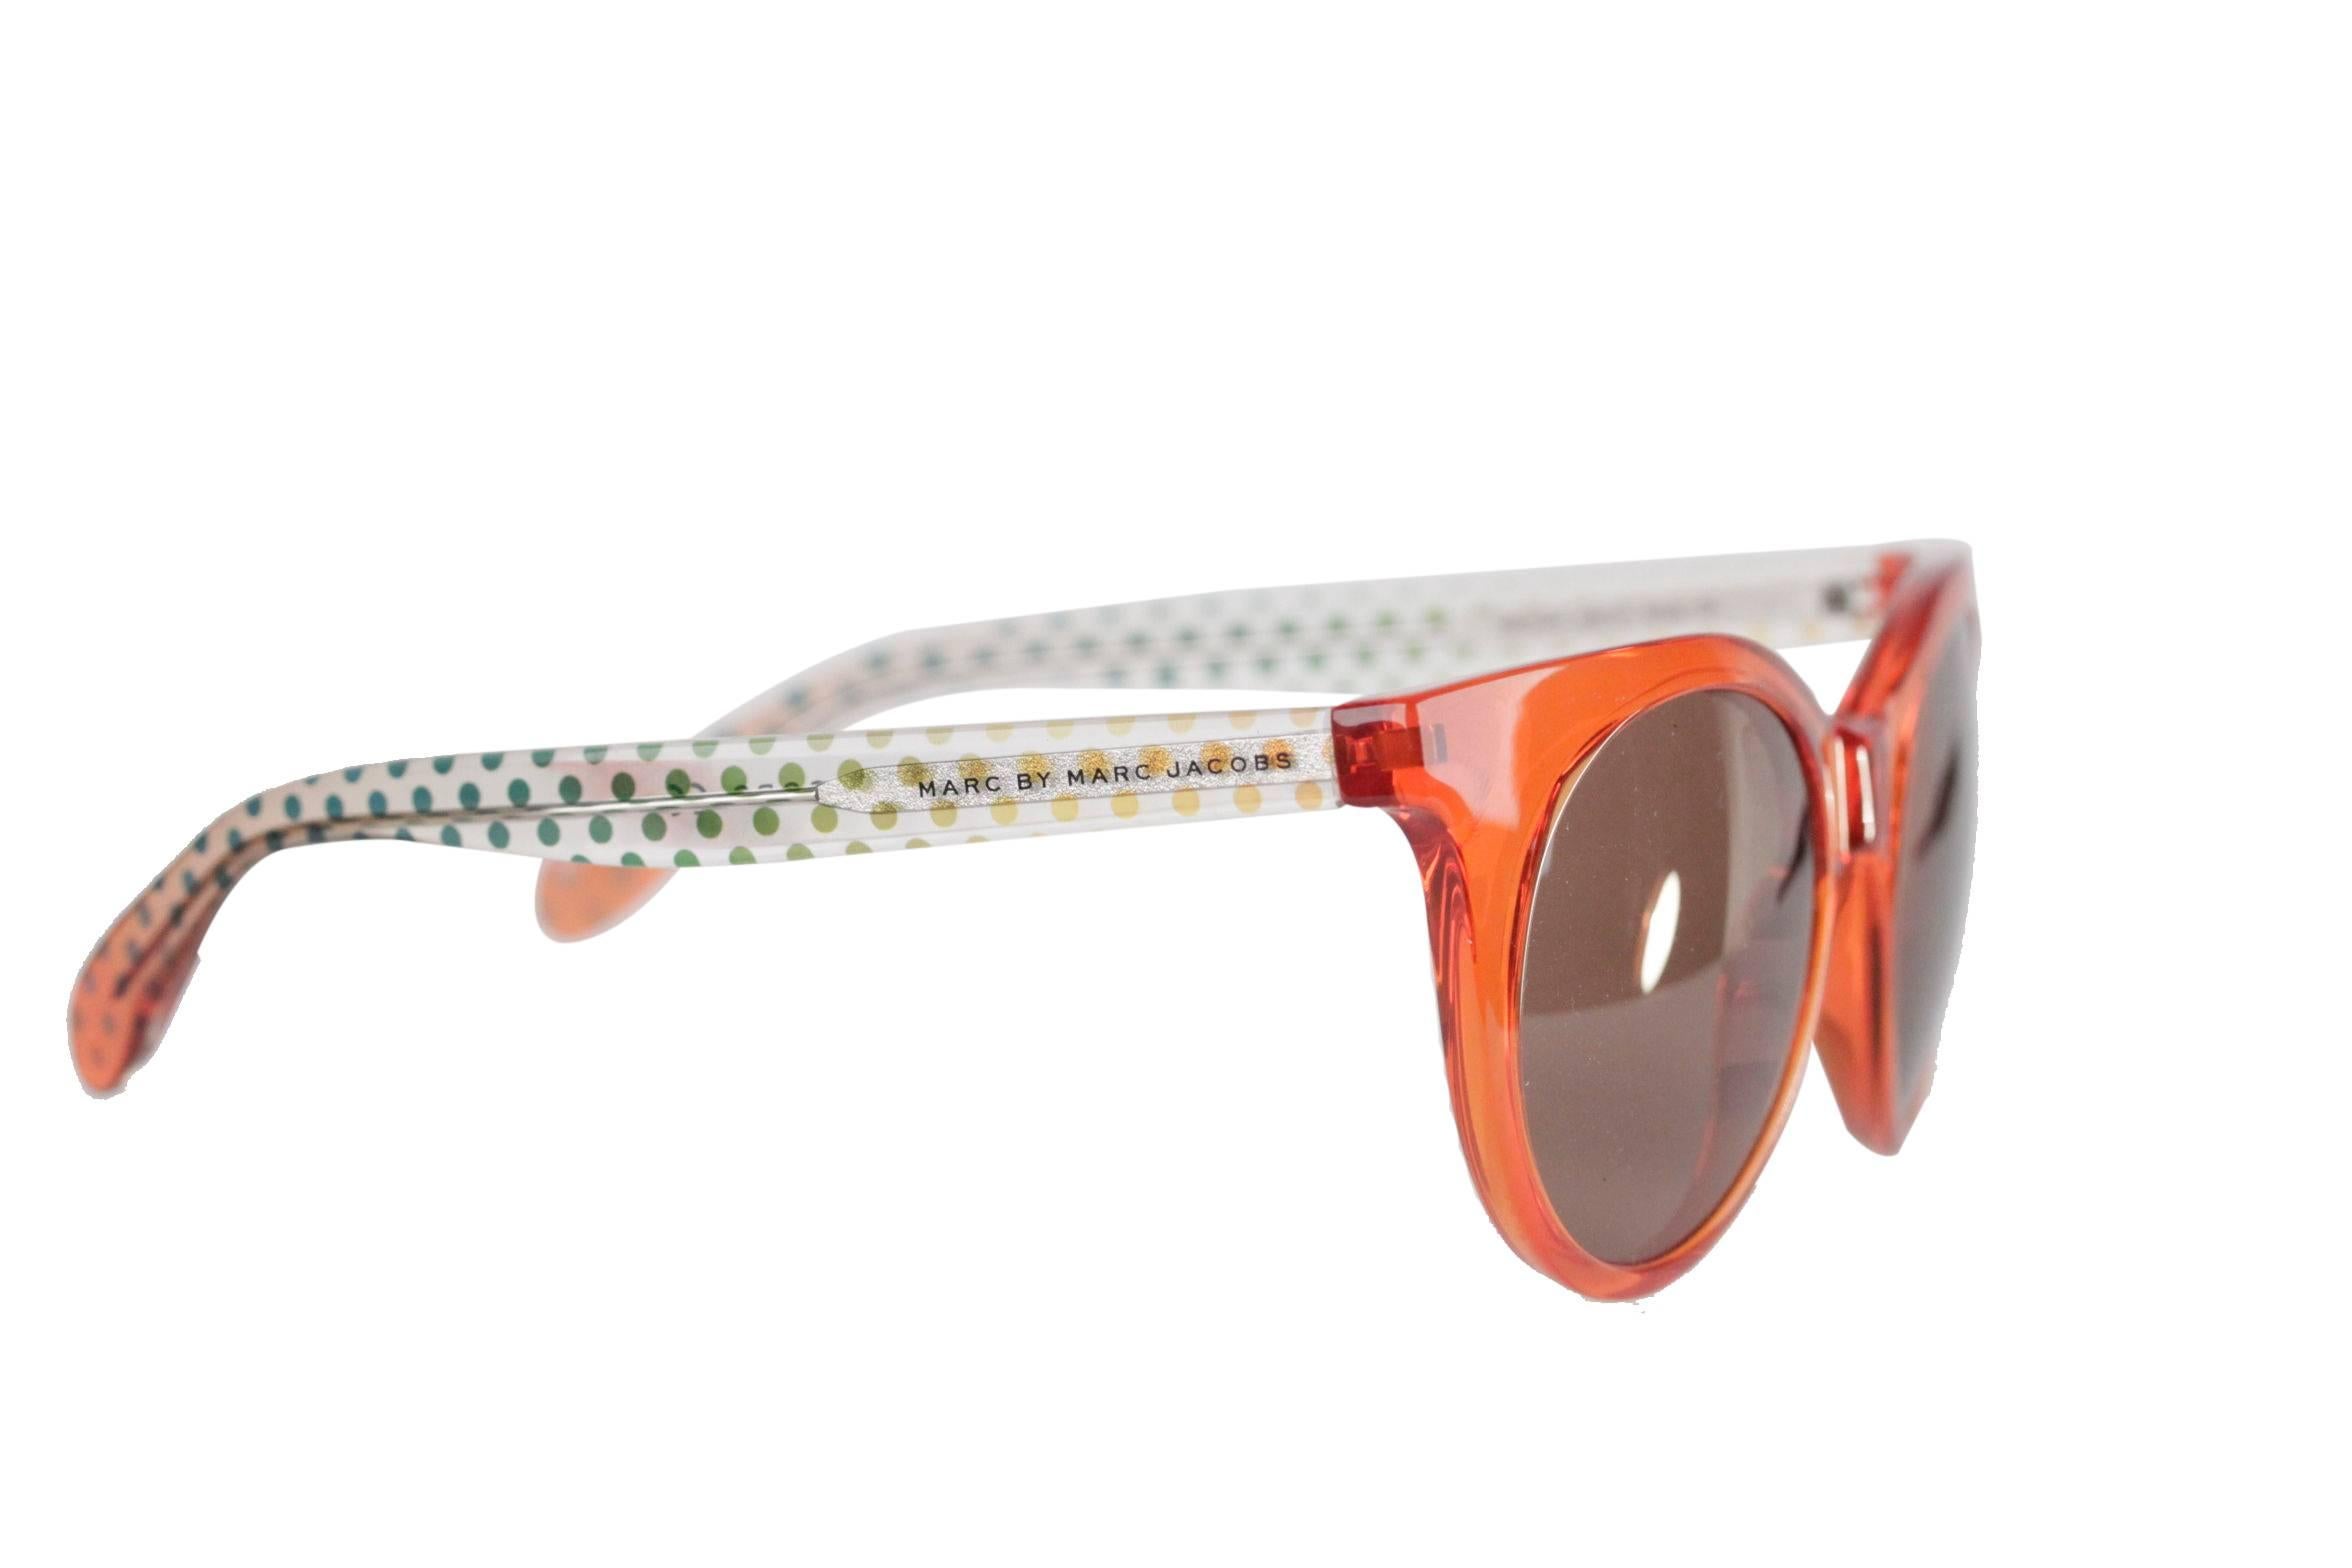  - Marc by Marc Jacobs MMJ 412/S sunglasses
- Orange plastic front and plastic transparent Temples with green polka dots pattern
- Brown lens
- 'Marc by Marc Jacobs' emobossed on the temple
- Original MARC by MARC JACOBS case and cleaning cloth